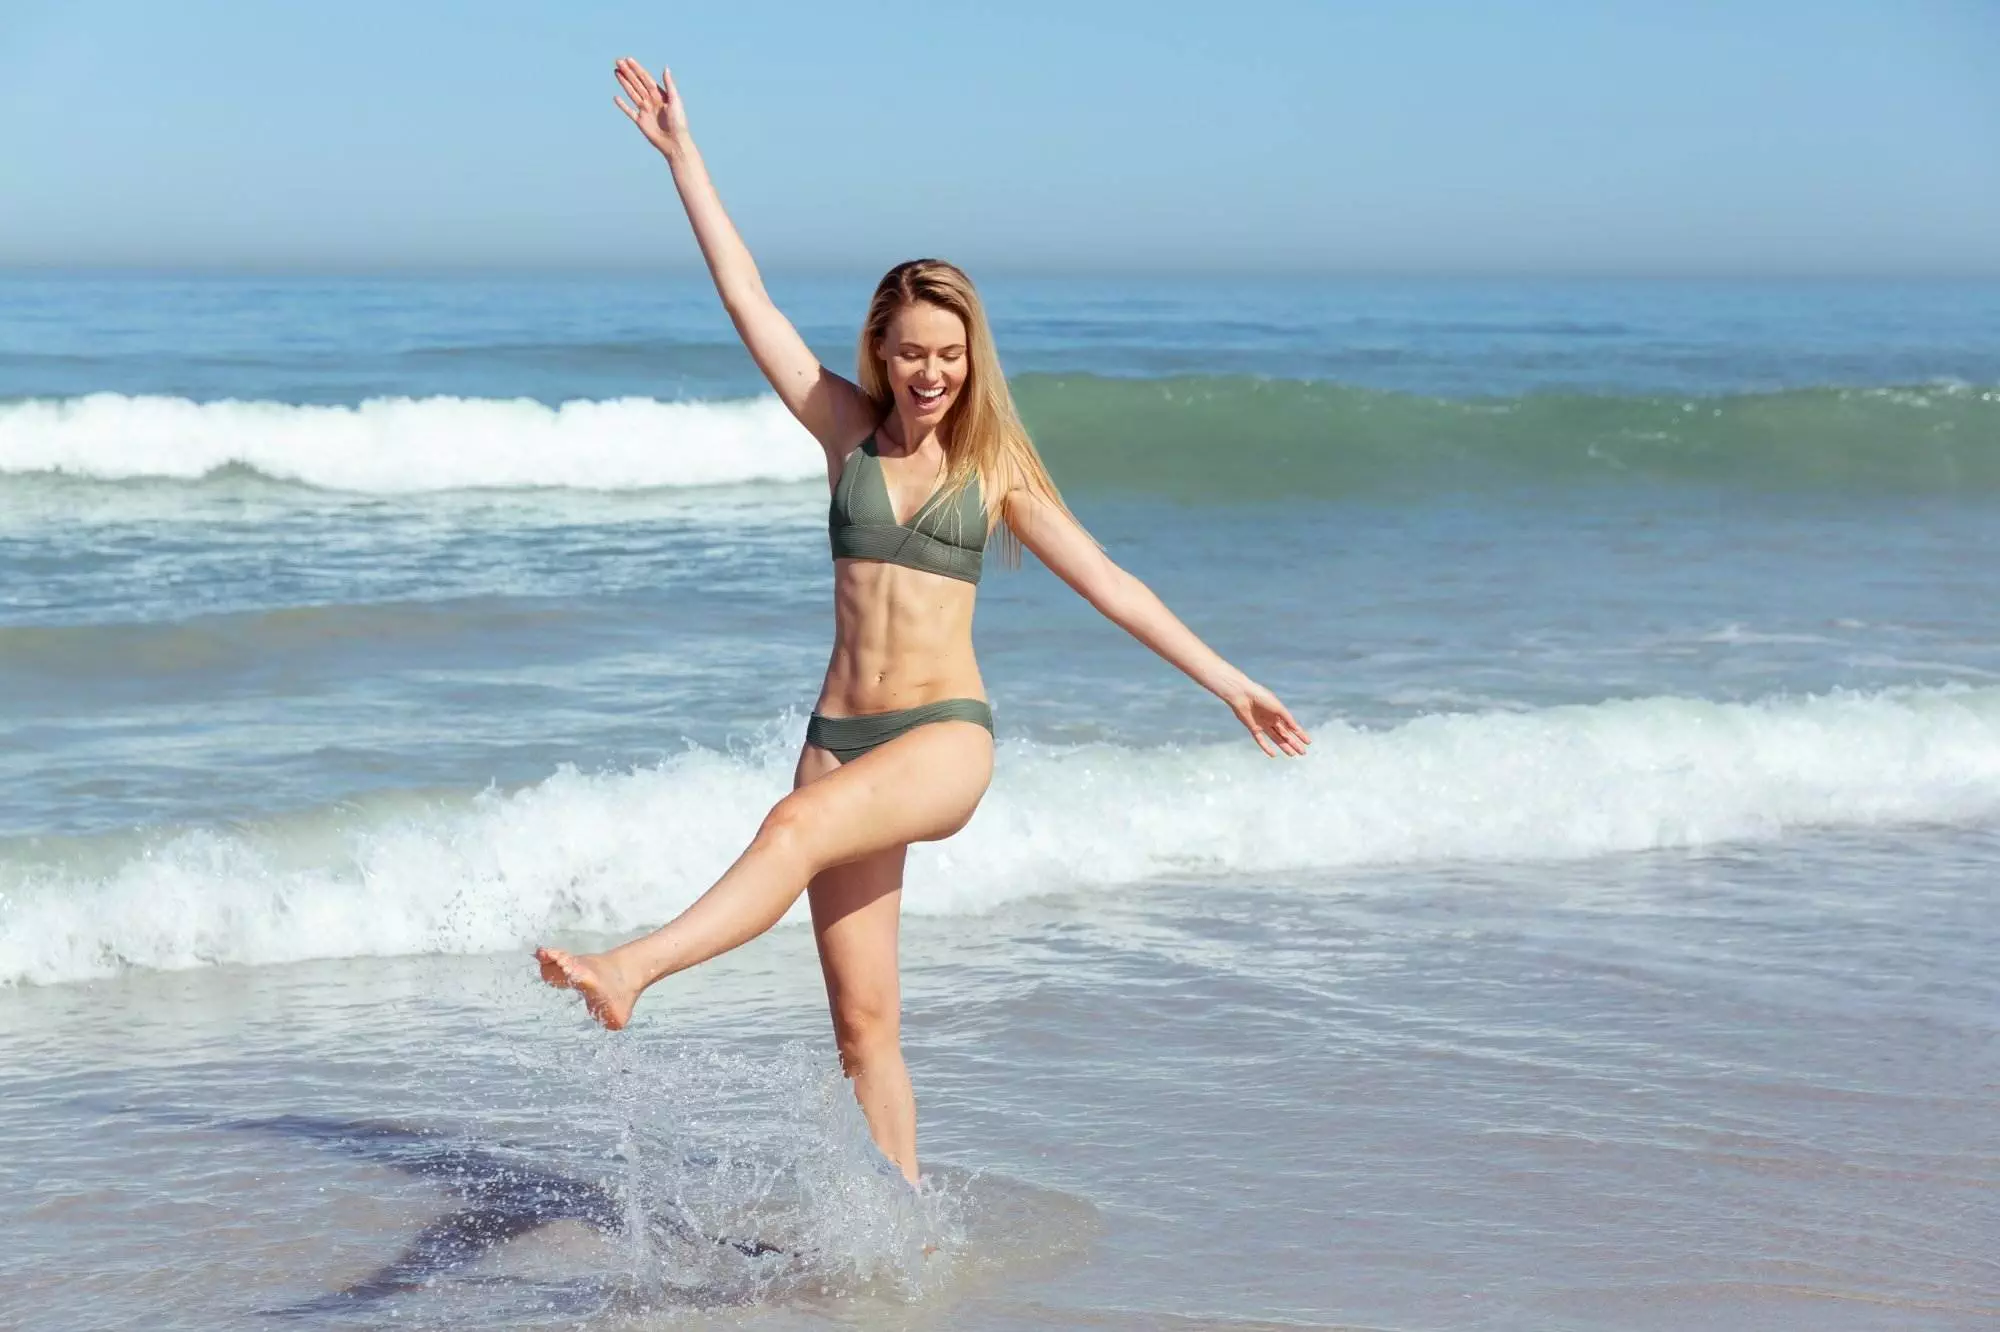 Woman playing in the ocean waves. Keto weight loss.